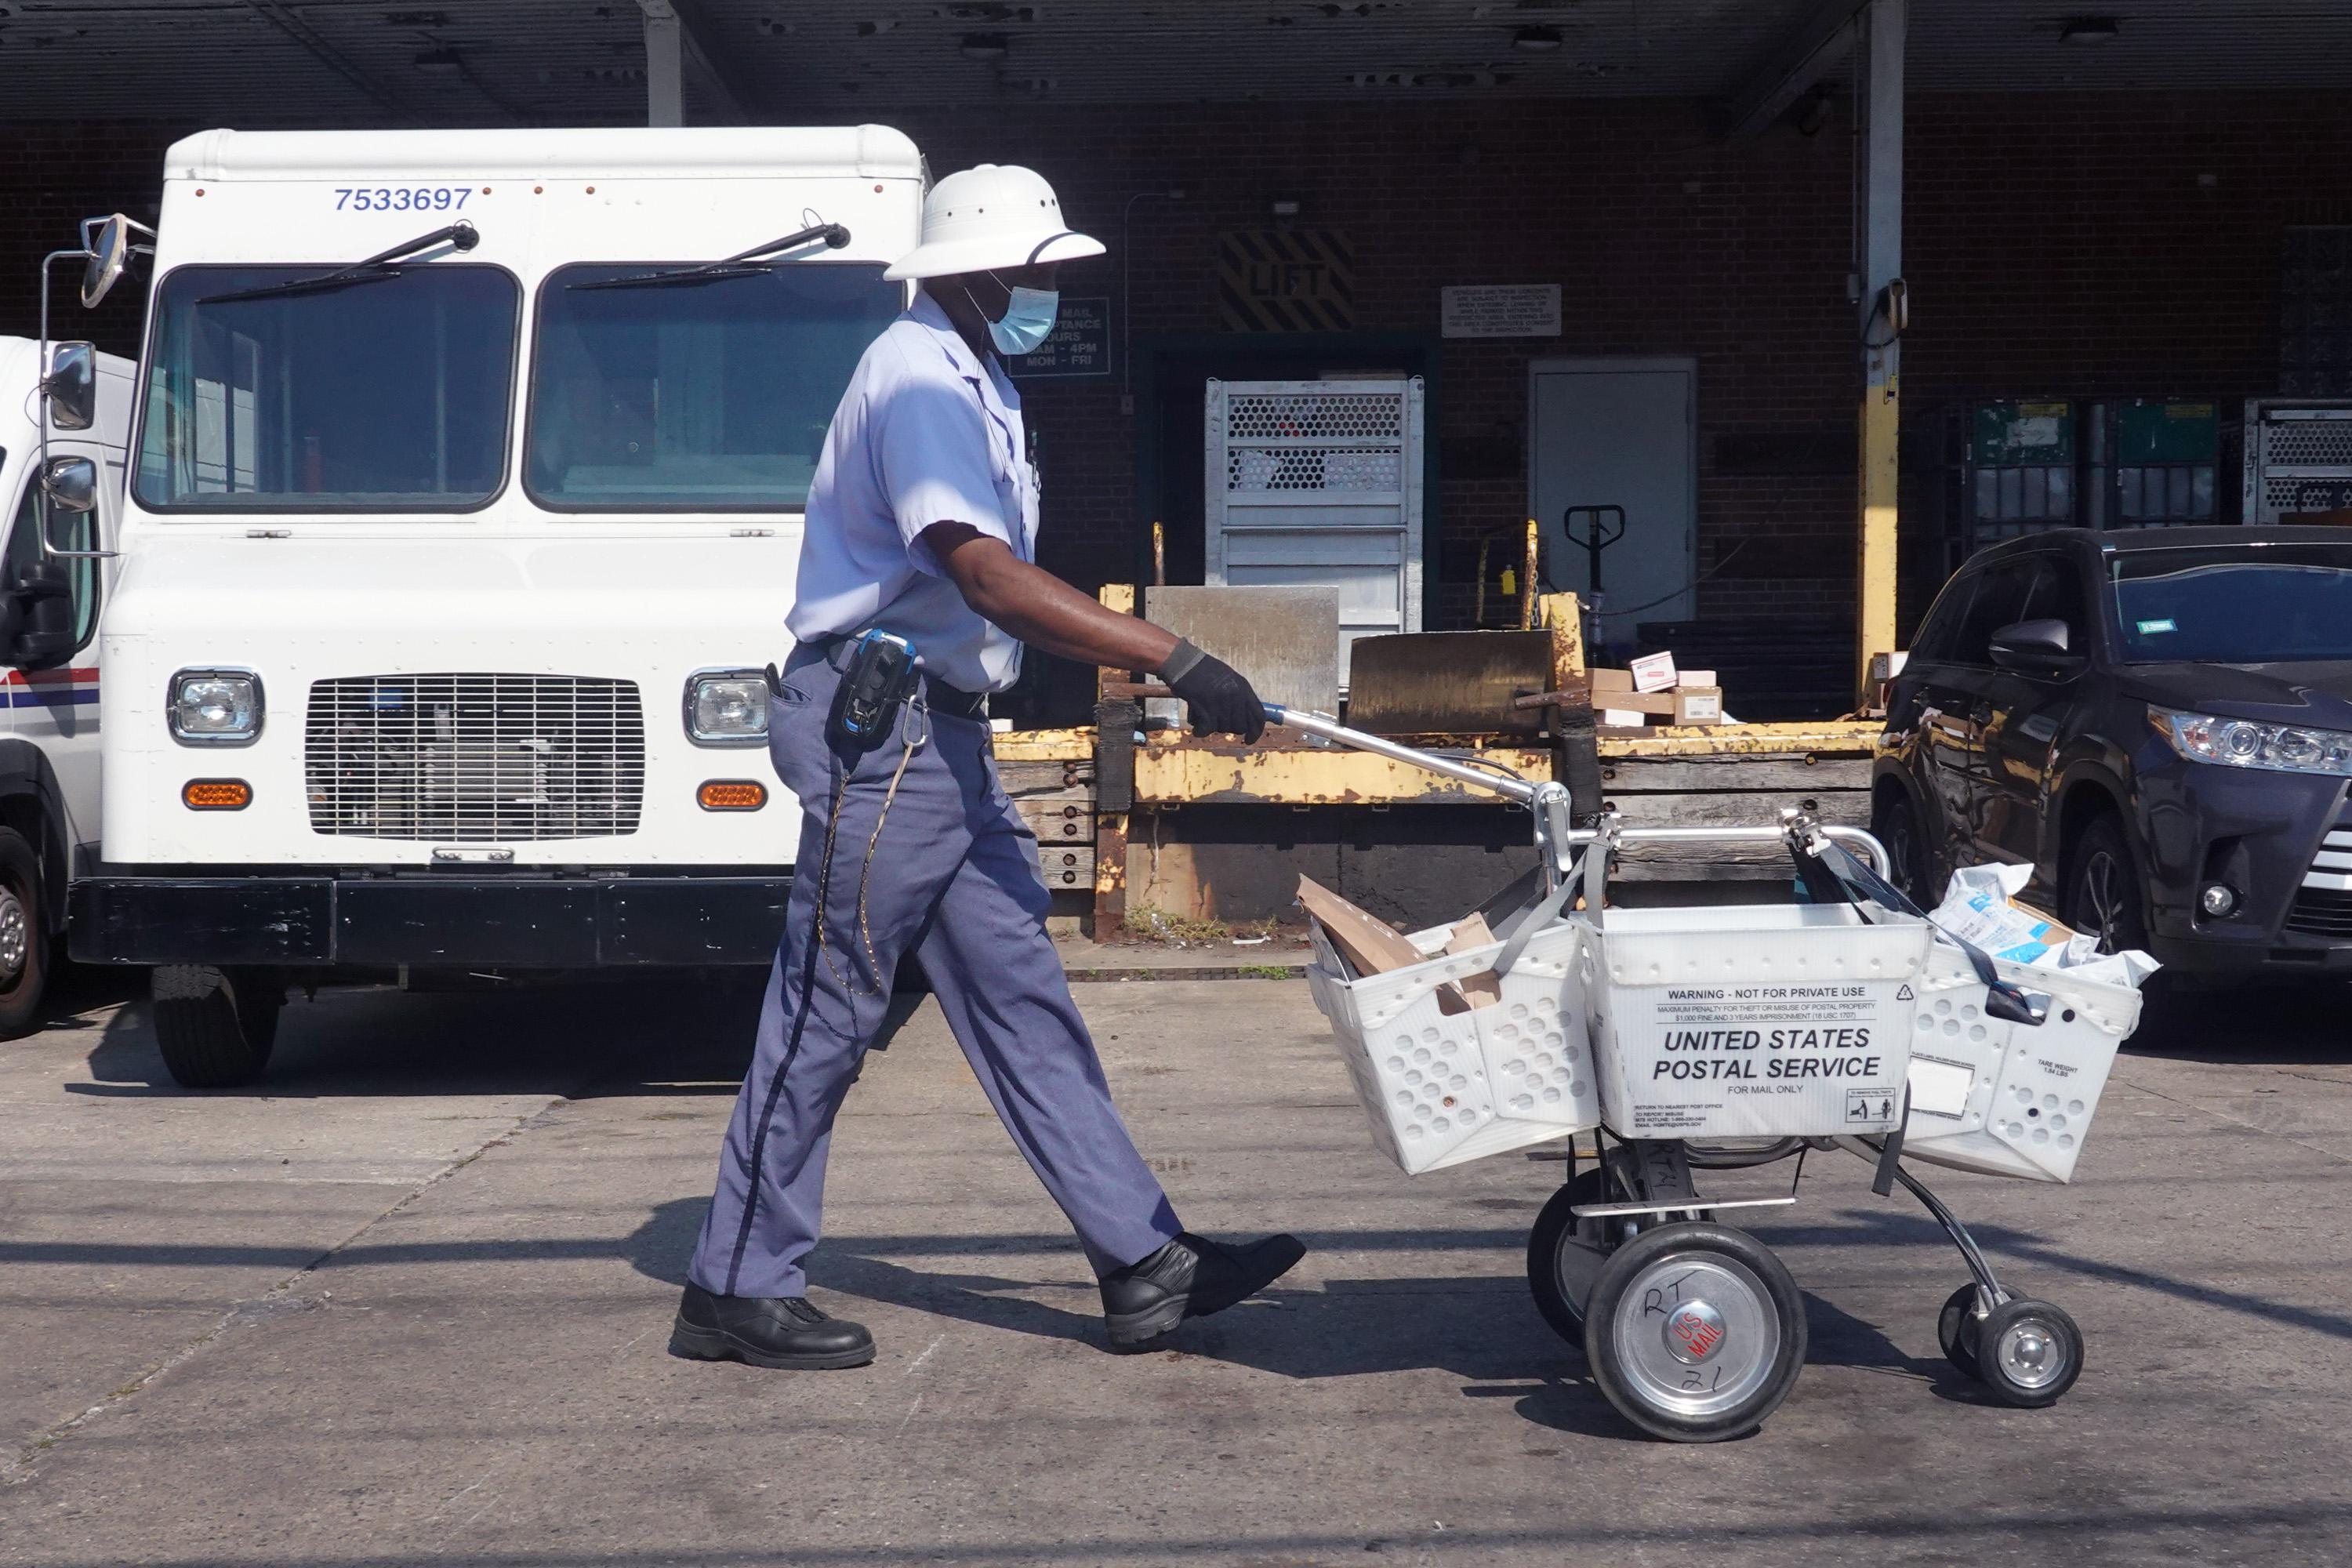 A postal worker in uniform pushes a cart full of mail past a loading dock area.